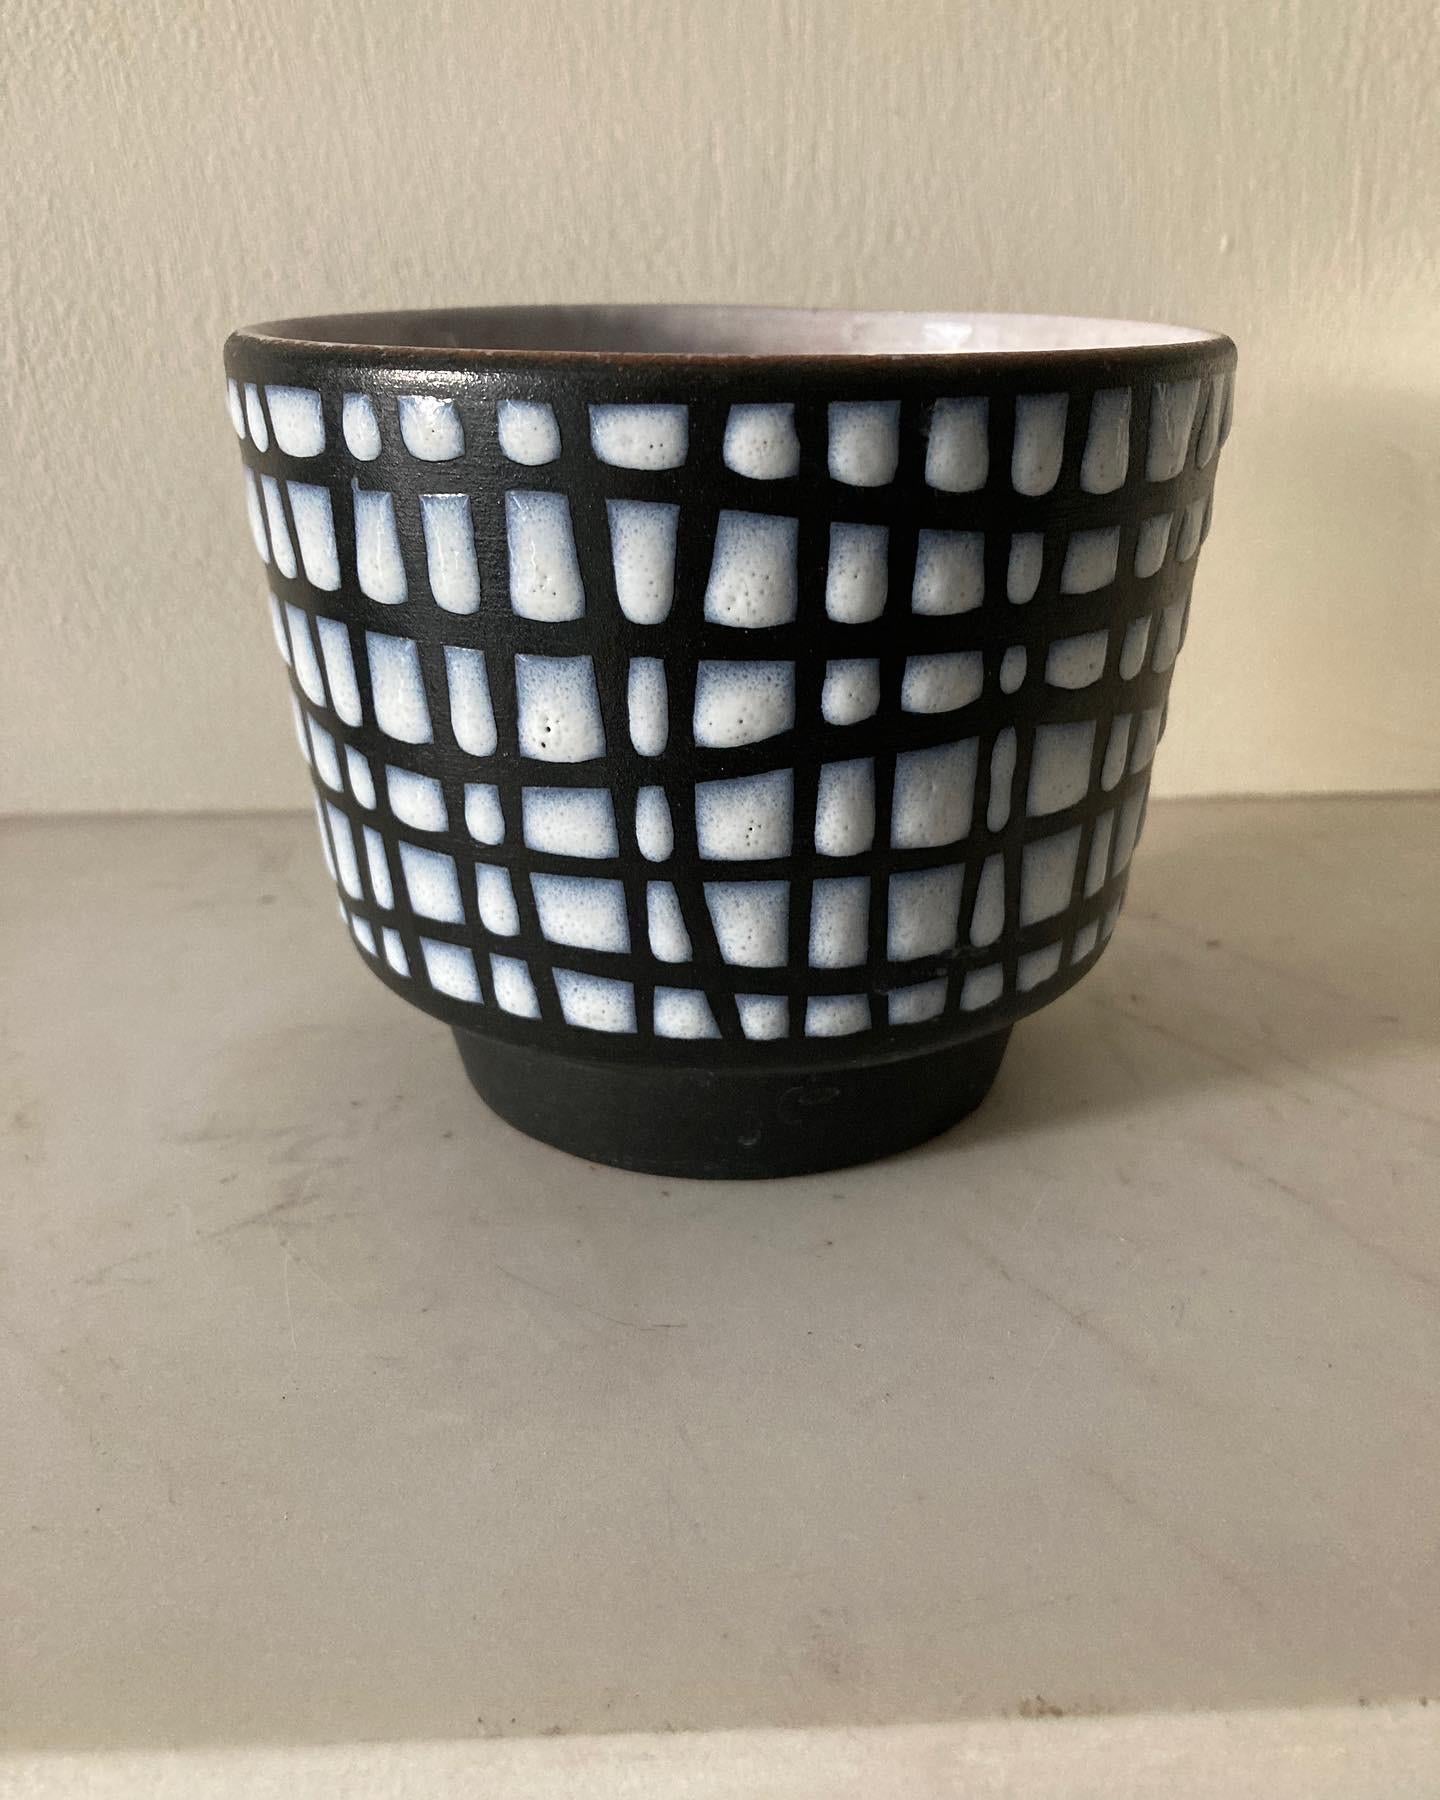 An early rare example of black and white glazed ceramic cache pot by Roger Capron. This piece is unsigned which shows it is an early example, when the bases of his pots were not glazed. Stamp 12/T with an indistinct mark. A good piece of Vallauris